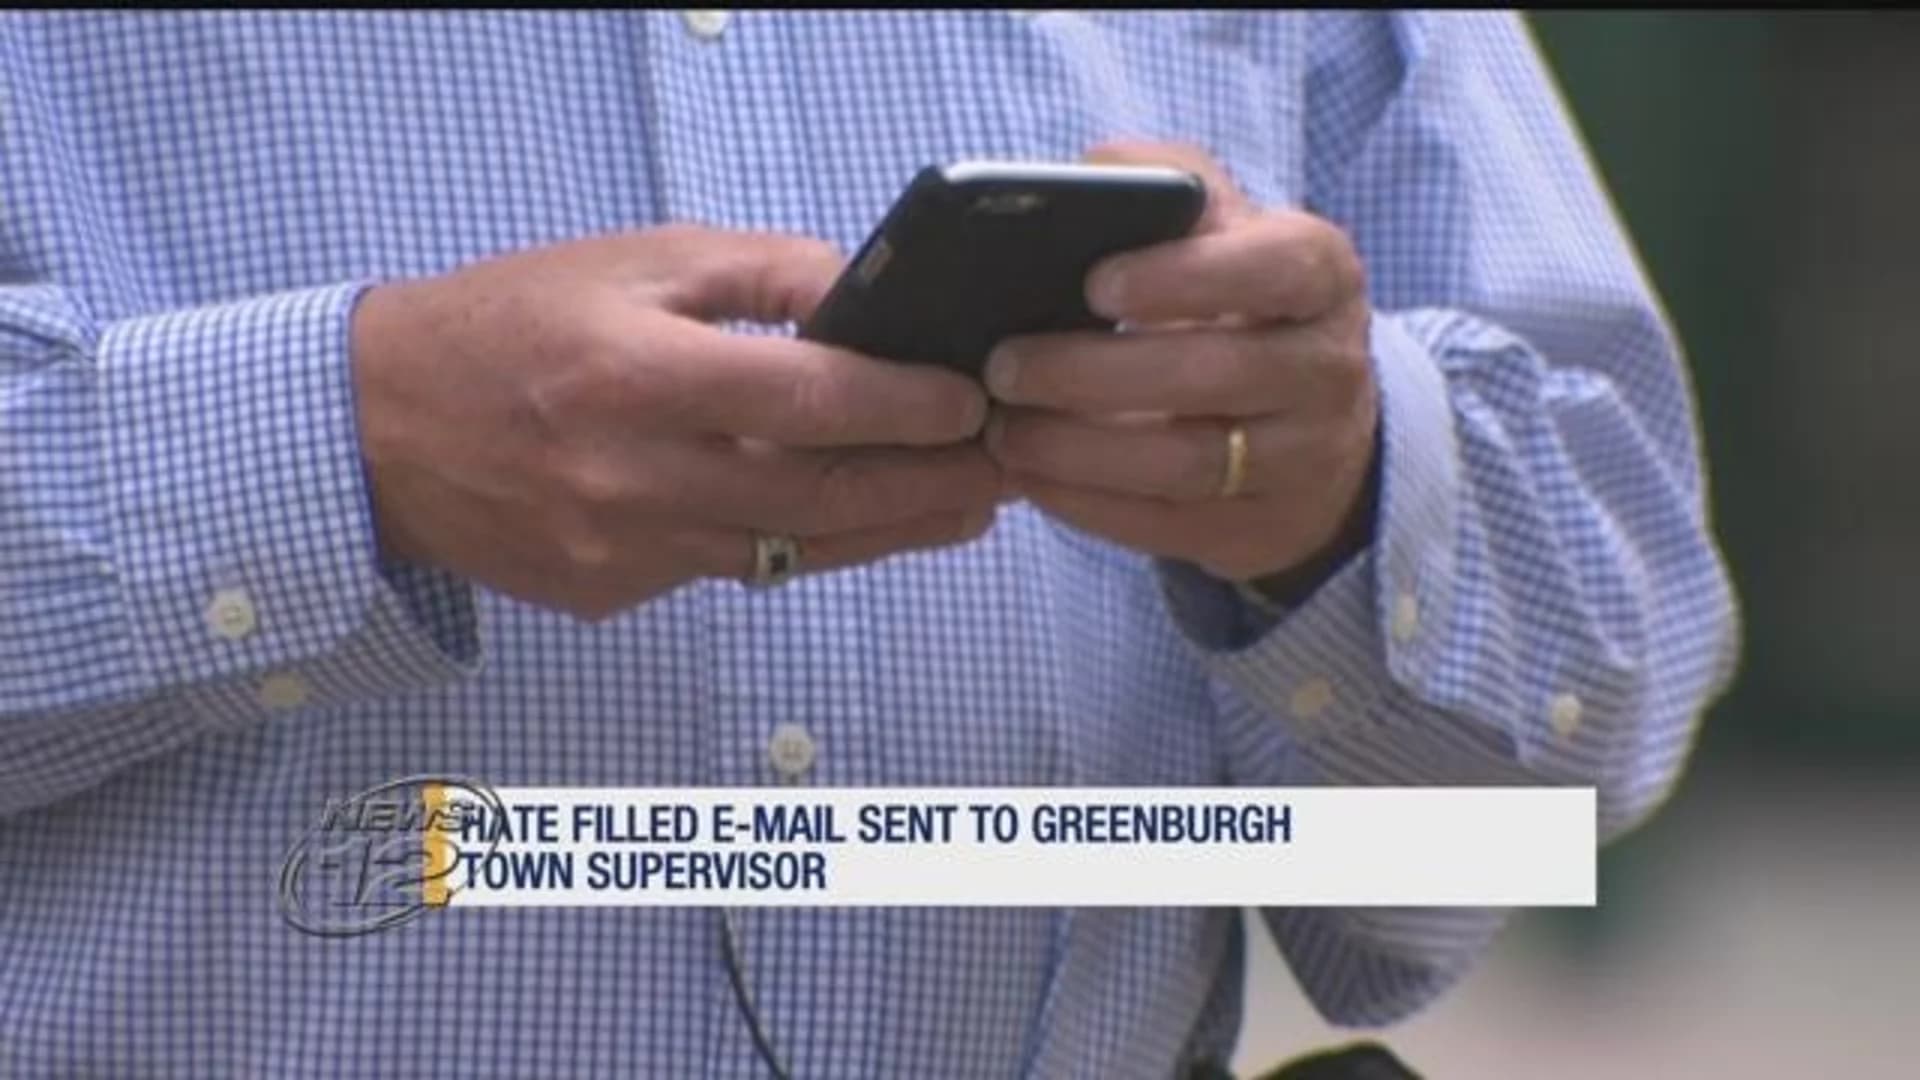 Police charge man accused of sending hate email to town supervisor